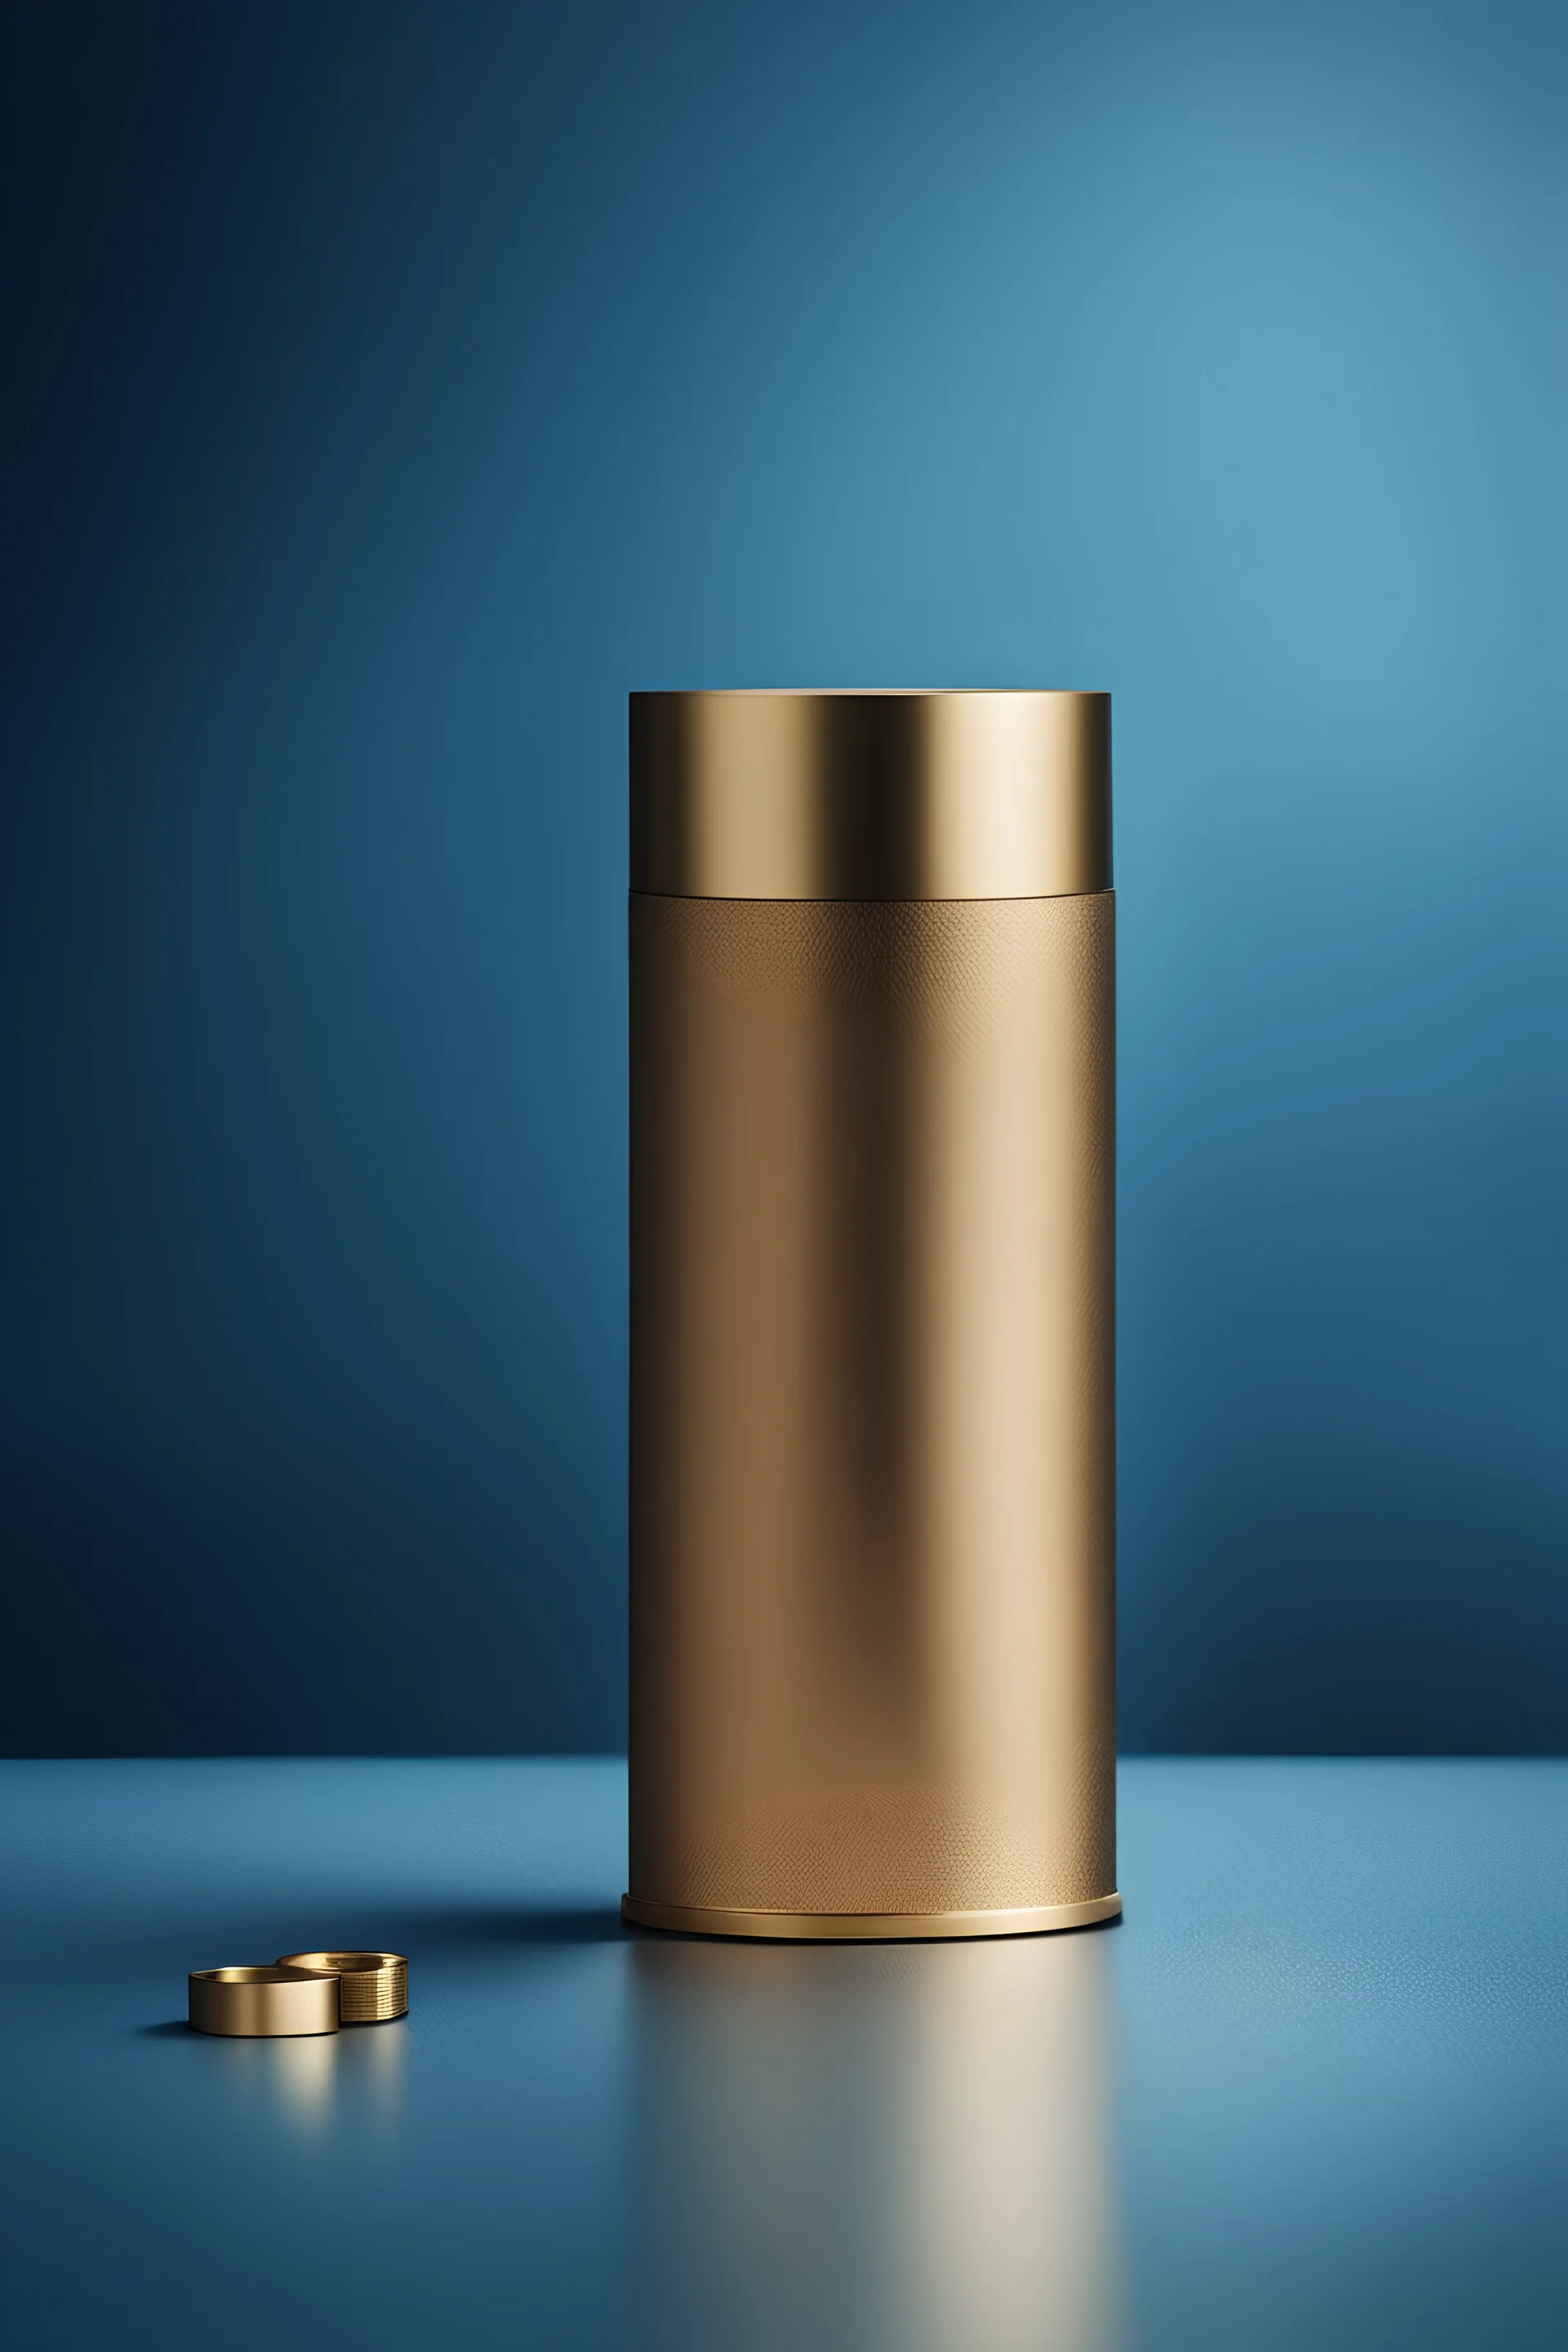 create a high quality minimal poster for mono product reveal photo with nice photography techniques from a brass Coupling wall elbow fitting , dark semi blue background, a dreamy blurred bokeh background with excellent warm lighting, on a luxury scenes in a studio splash clear water , on a pice of velvet